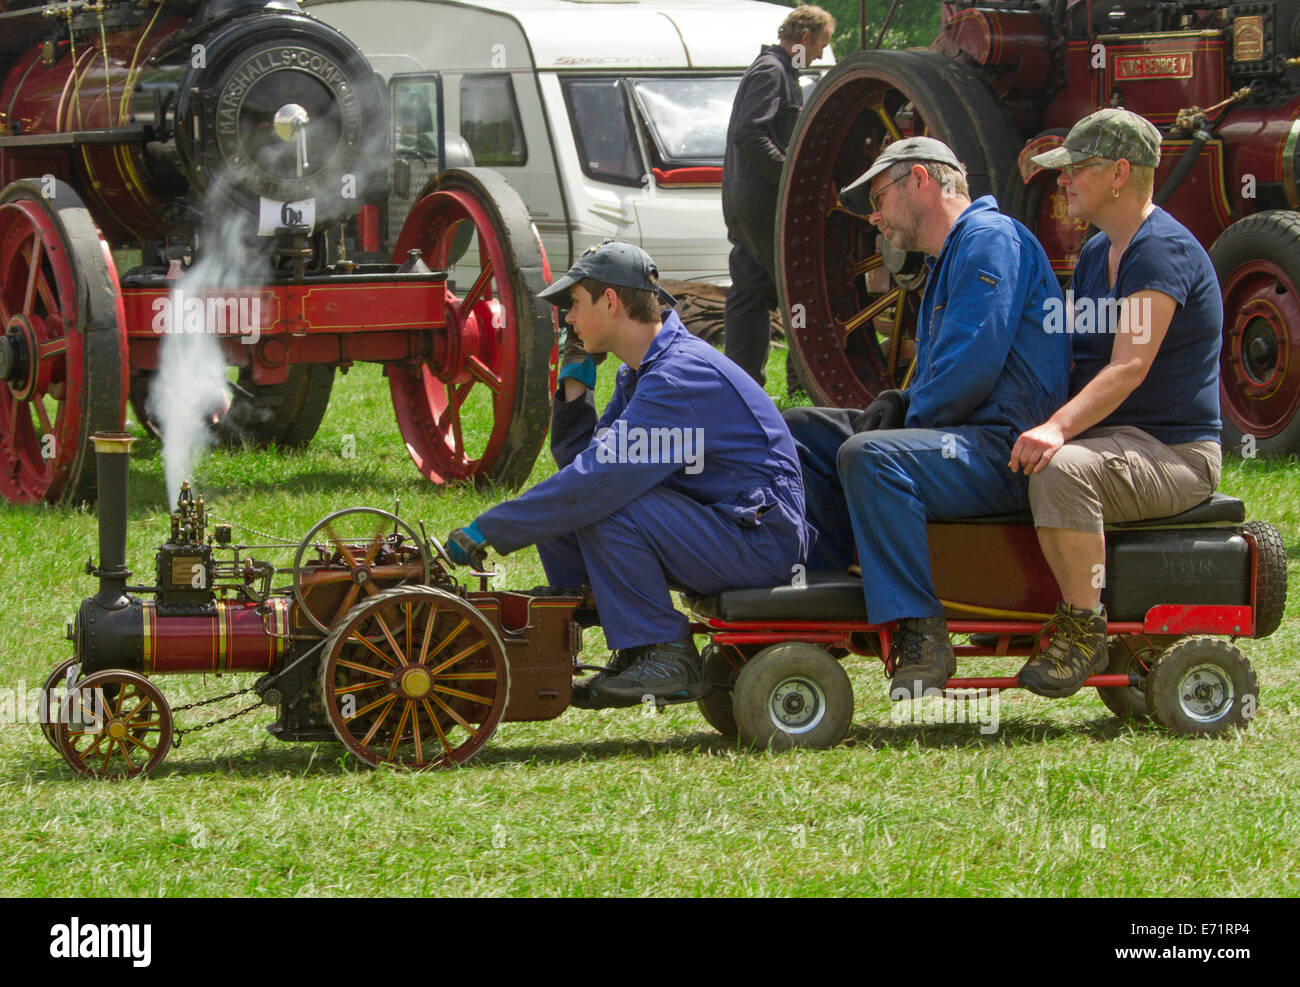 Three men riding on trailer pulled by miniature steam operated traction engine Stock Photo